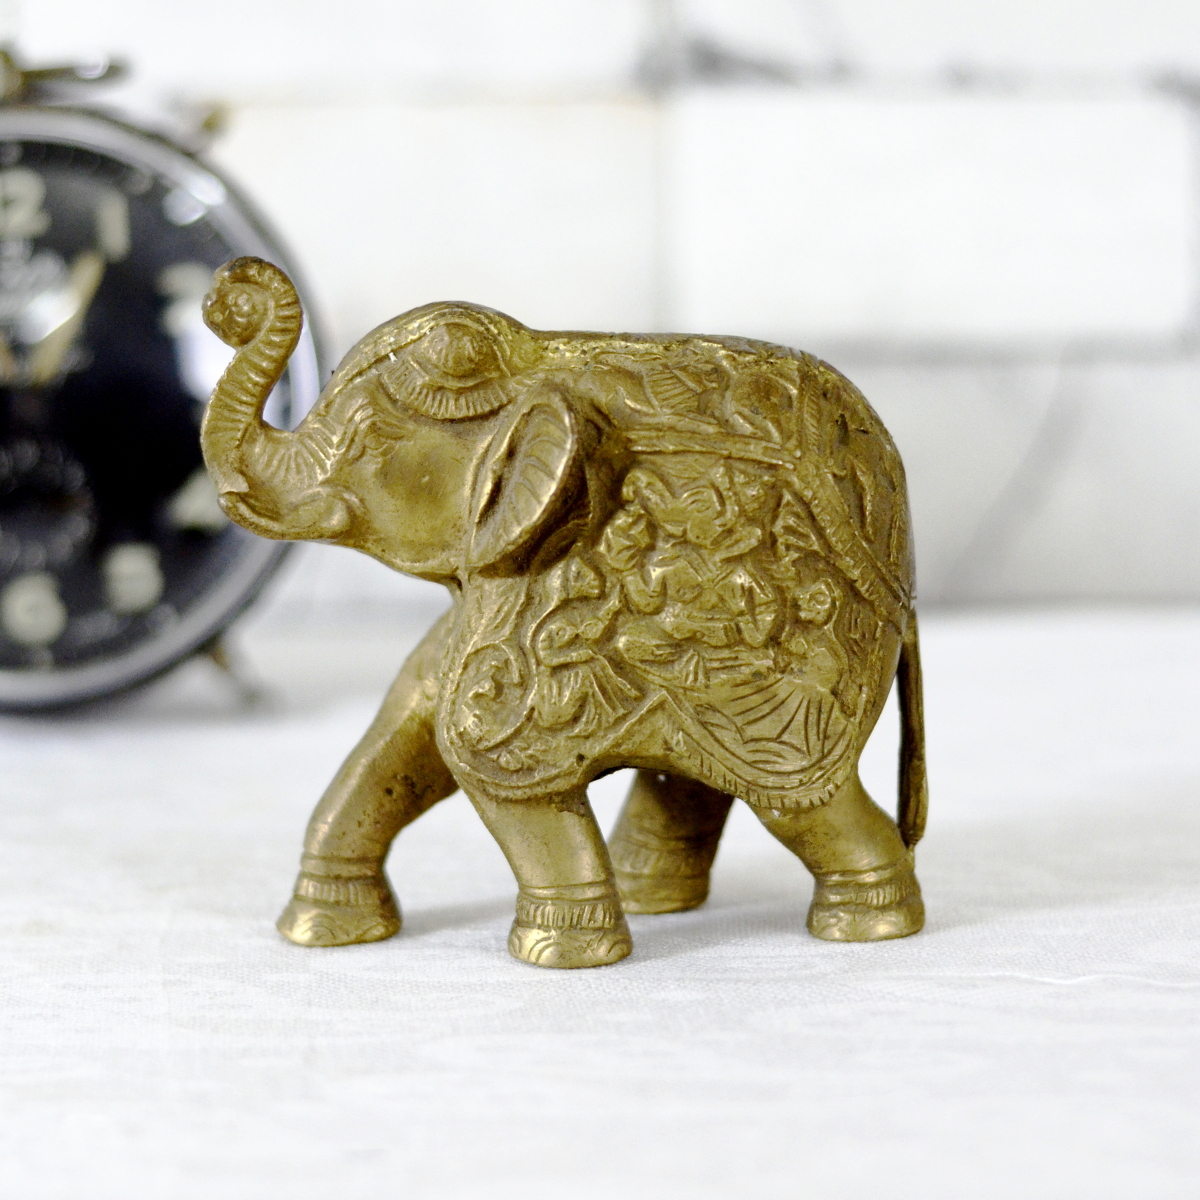 6 Inches Brass Elephant Statue Table Decor - Antikcart